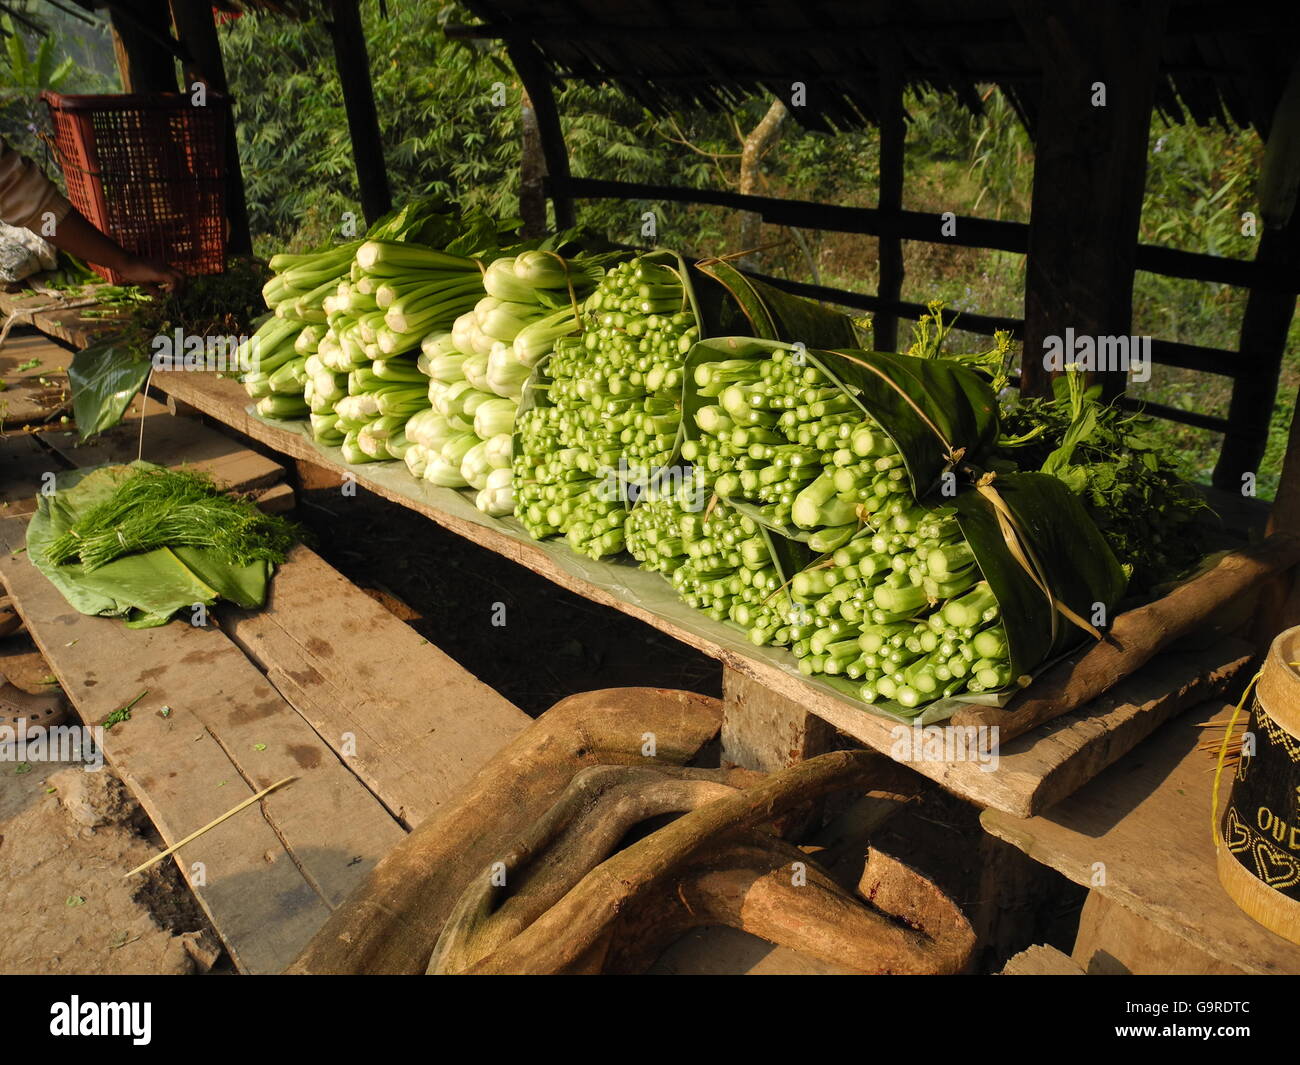 vegetables for sale, chickoree, Muang Xai, north western province Oudomxay, Laos, Asia / Muang Xai Stock Photo